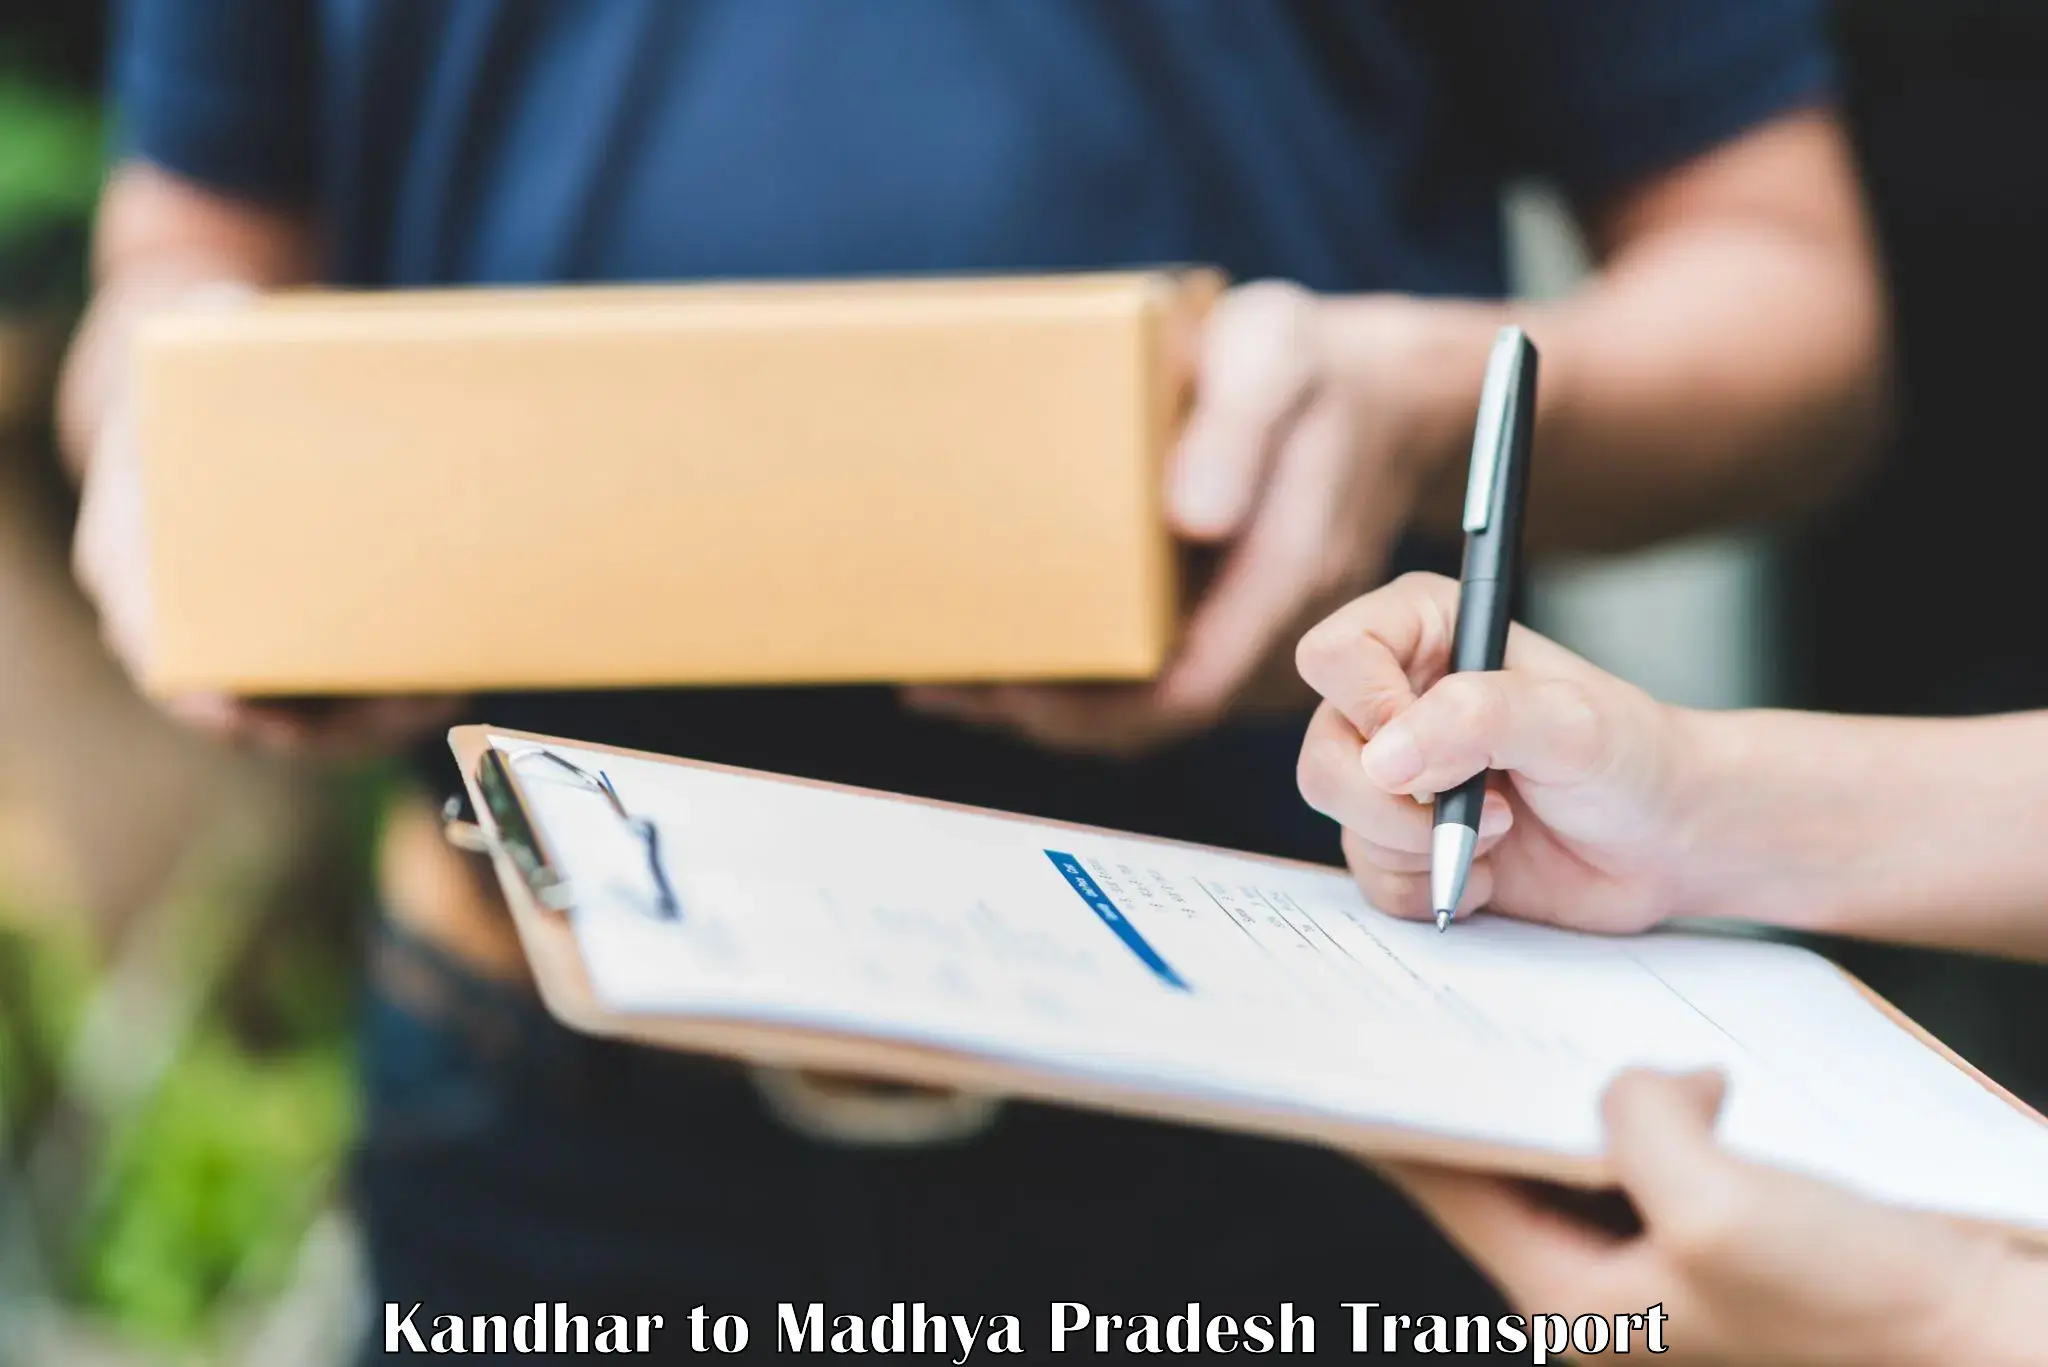 Domestic goods transportation services Kandhar to Gwalior